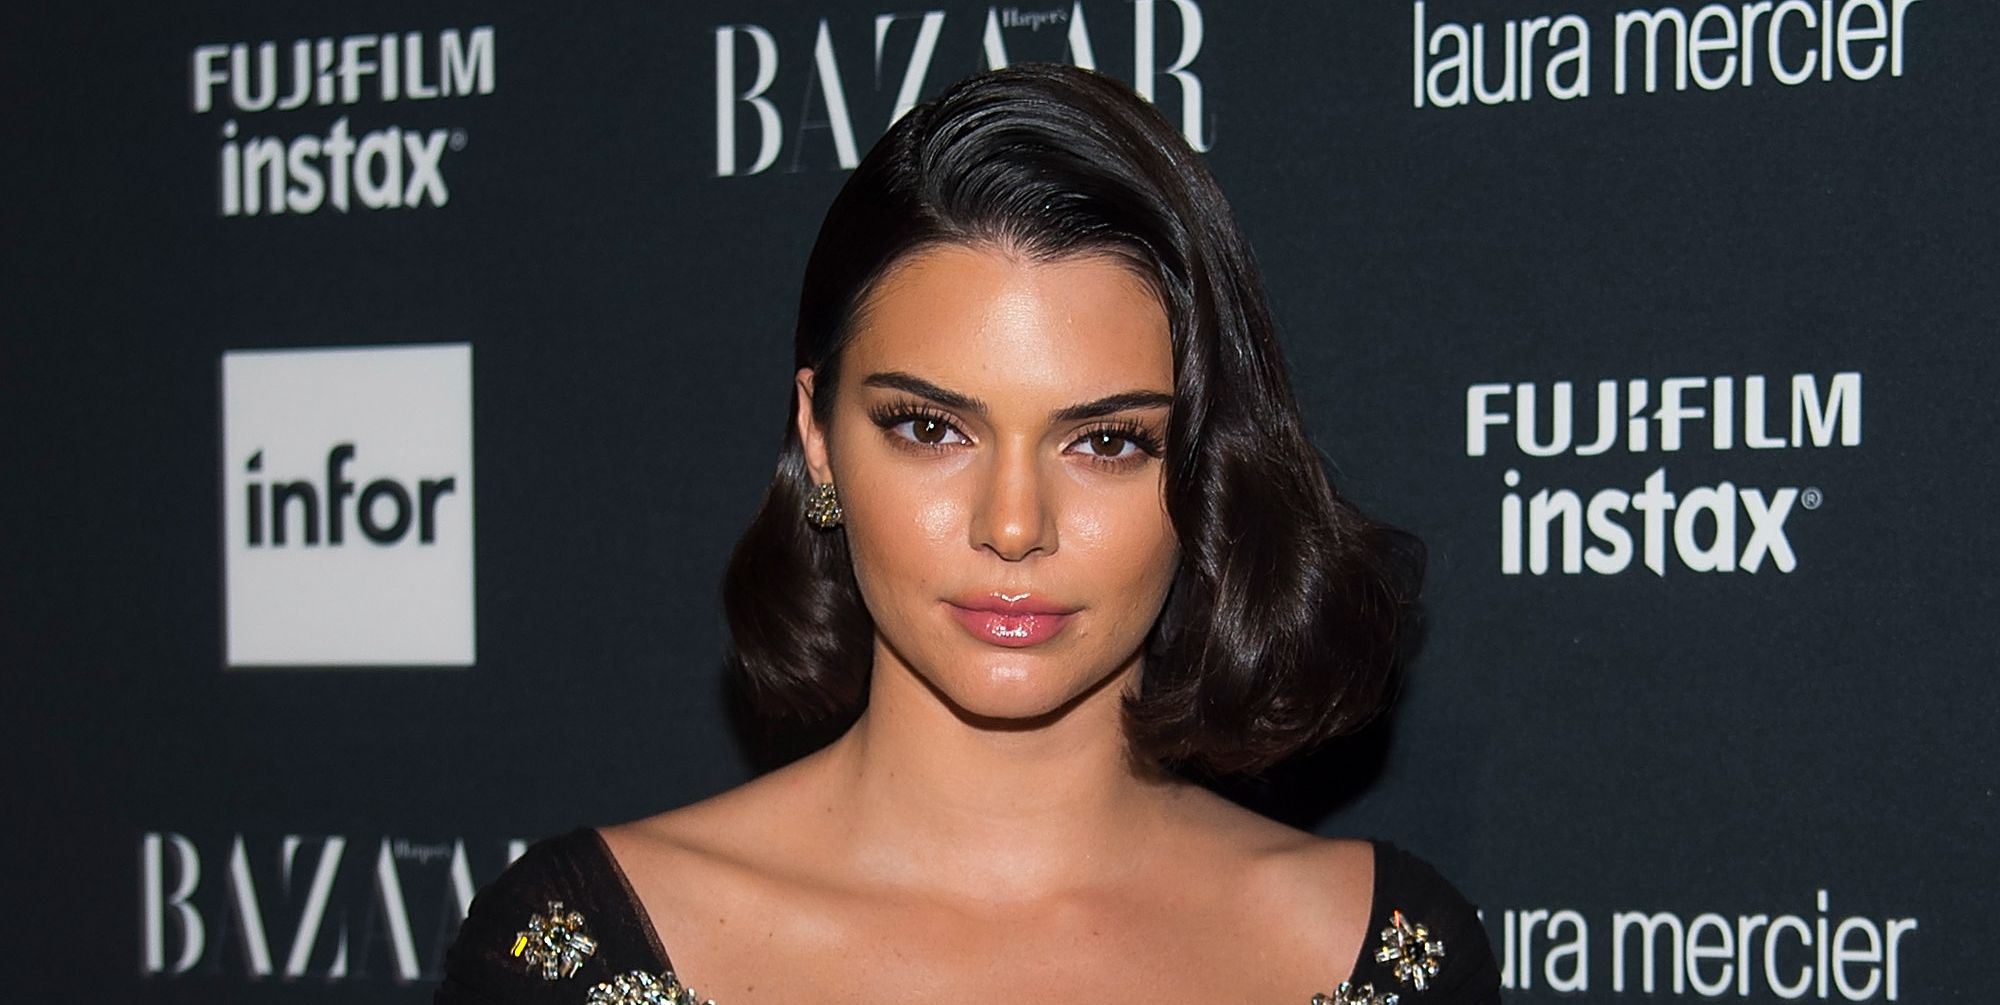 Here's Kendall Jenner in a Super Sheer Bedazzled Confection